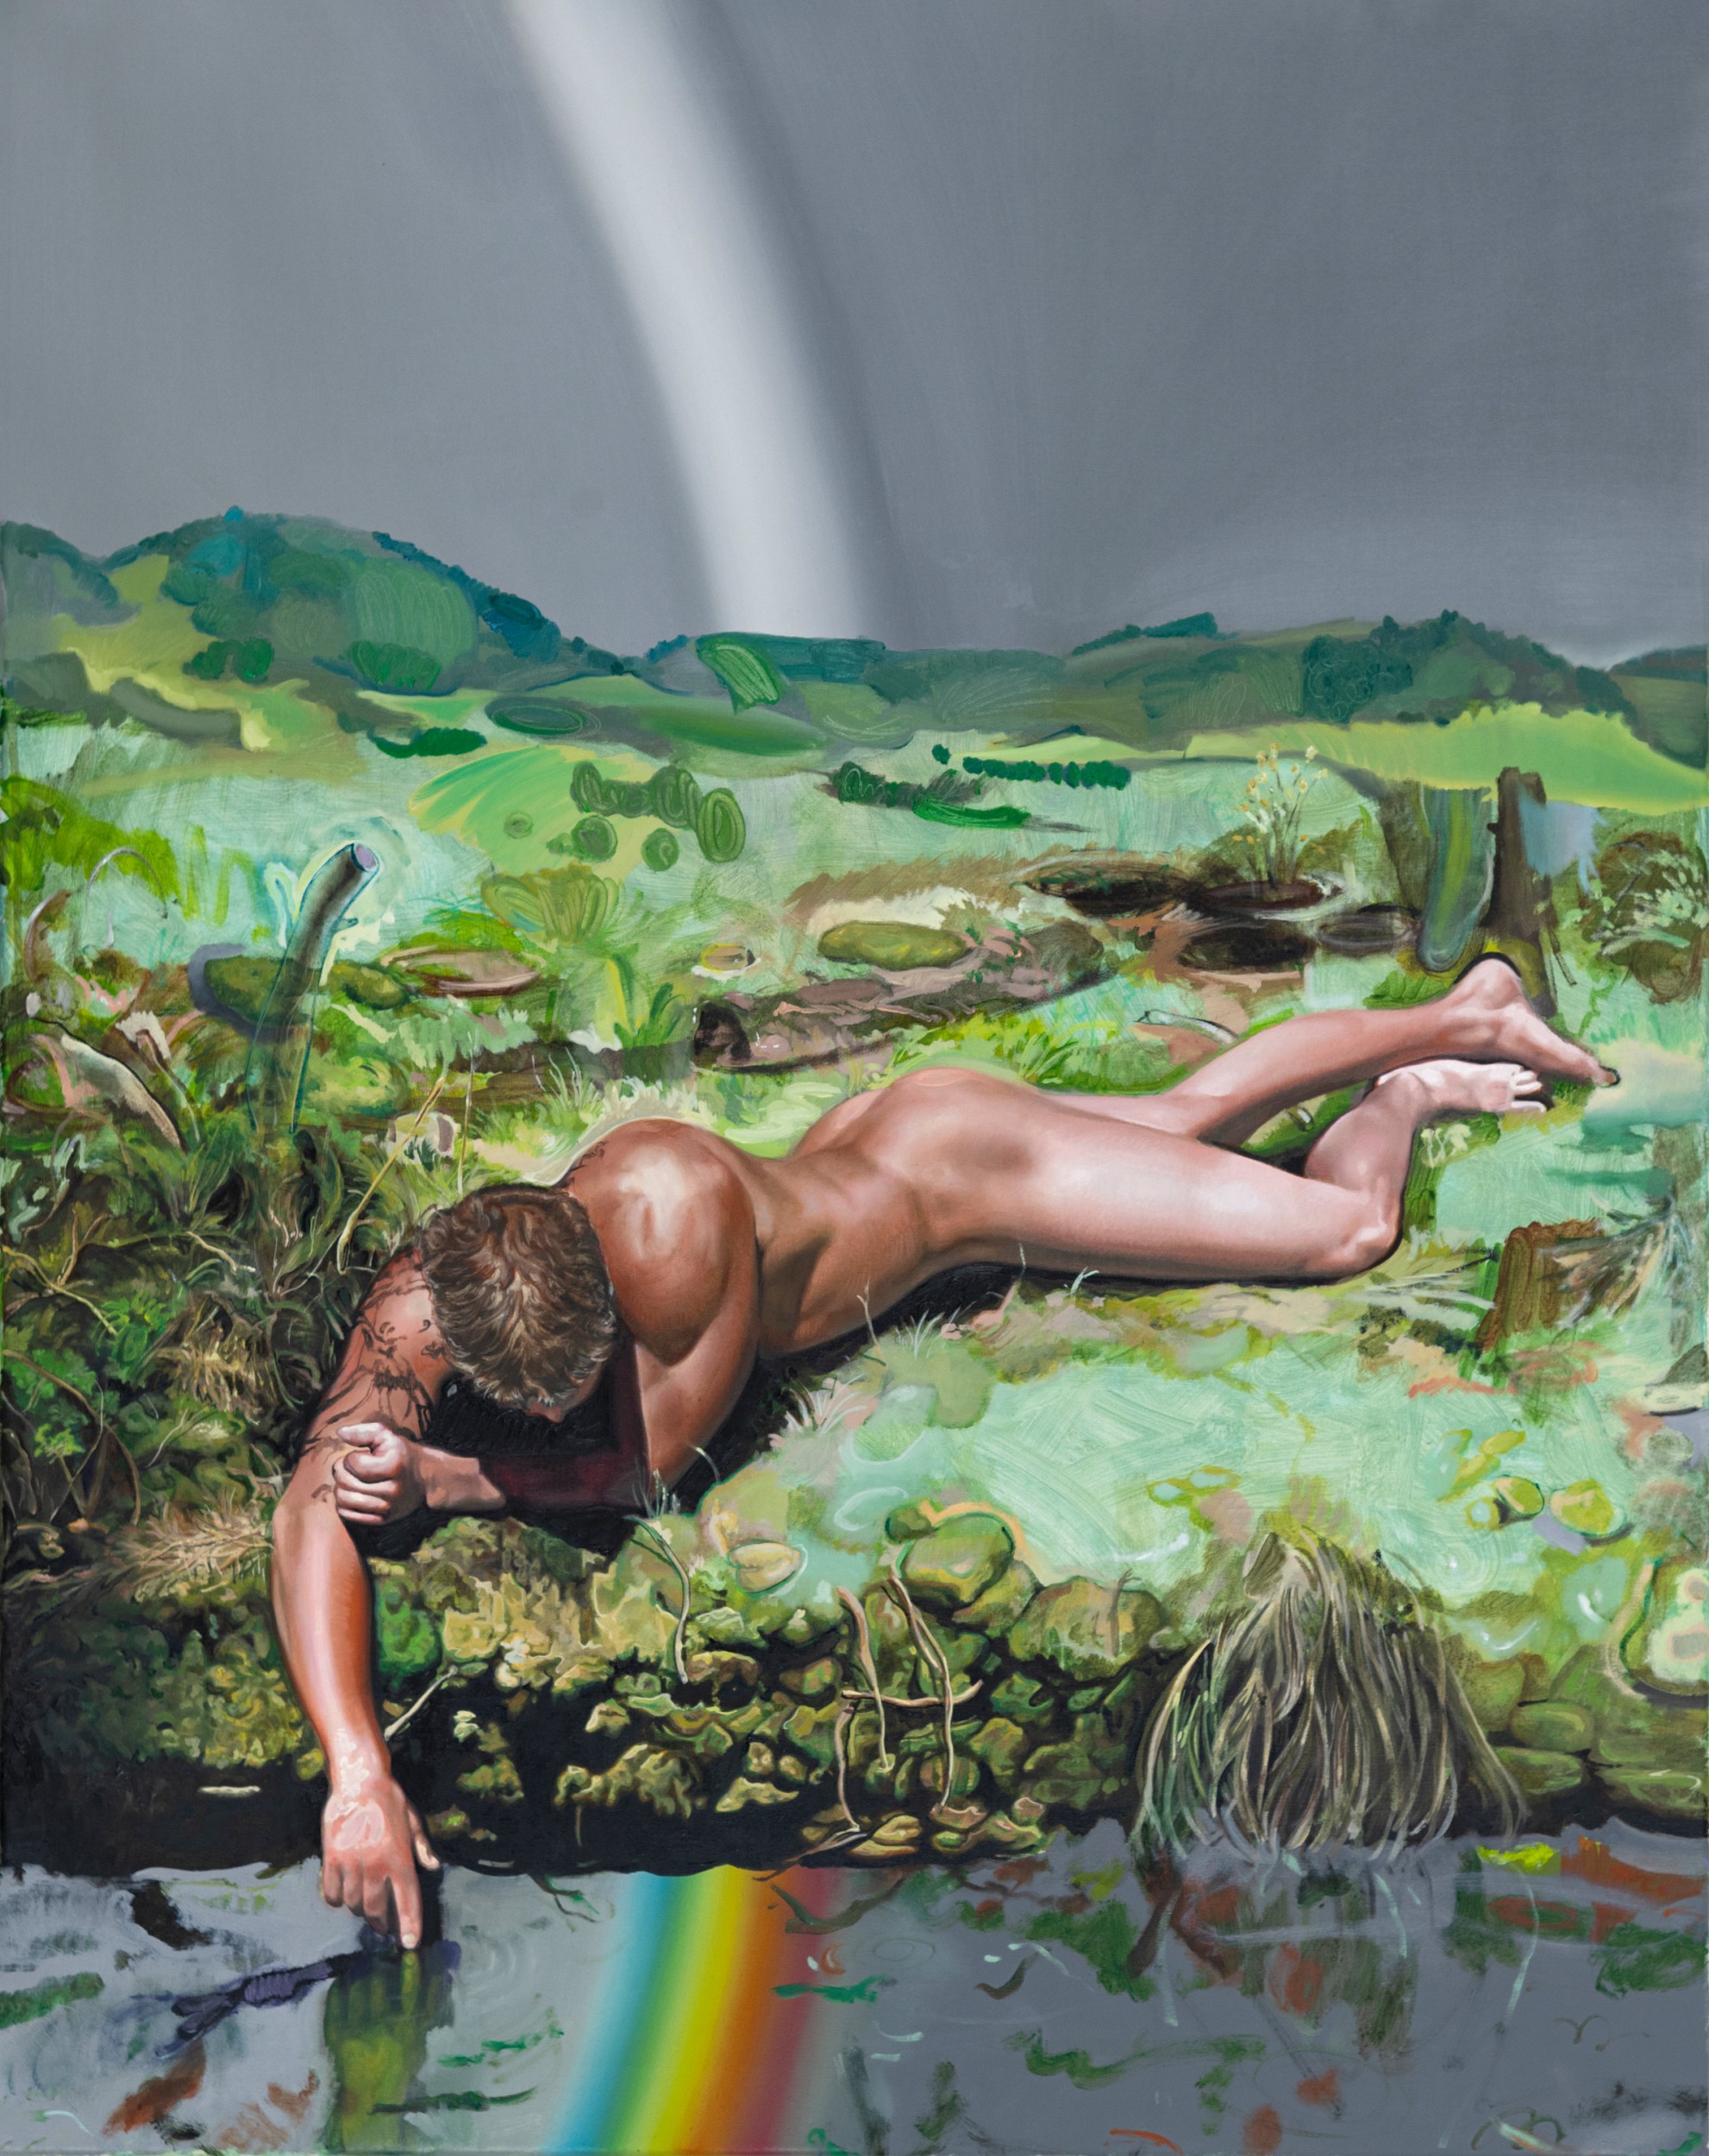 The narcissus effect, 2023 Oil and acrylic on canvas 100 x 80 cm | 39 x 32 in